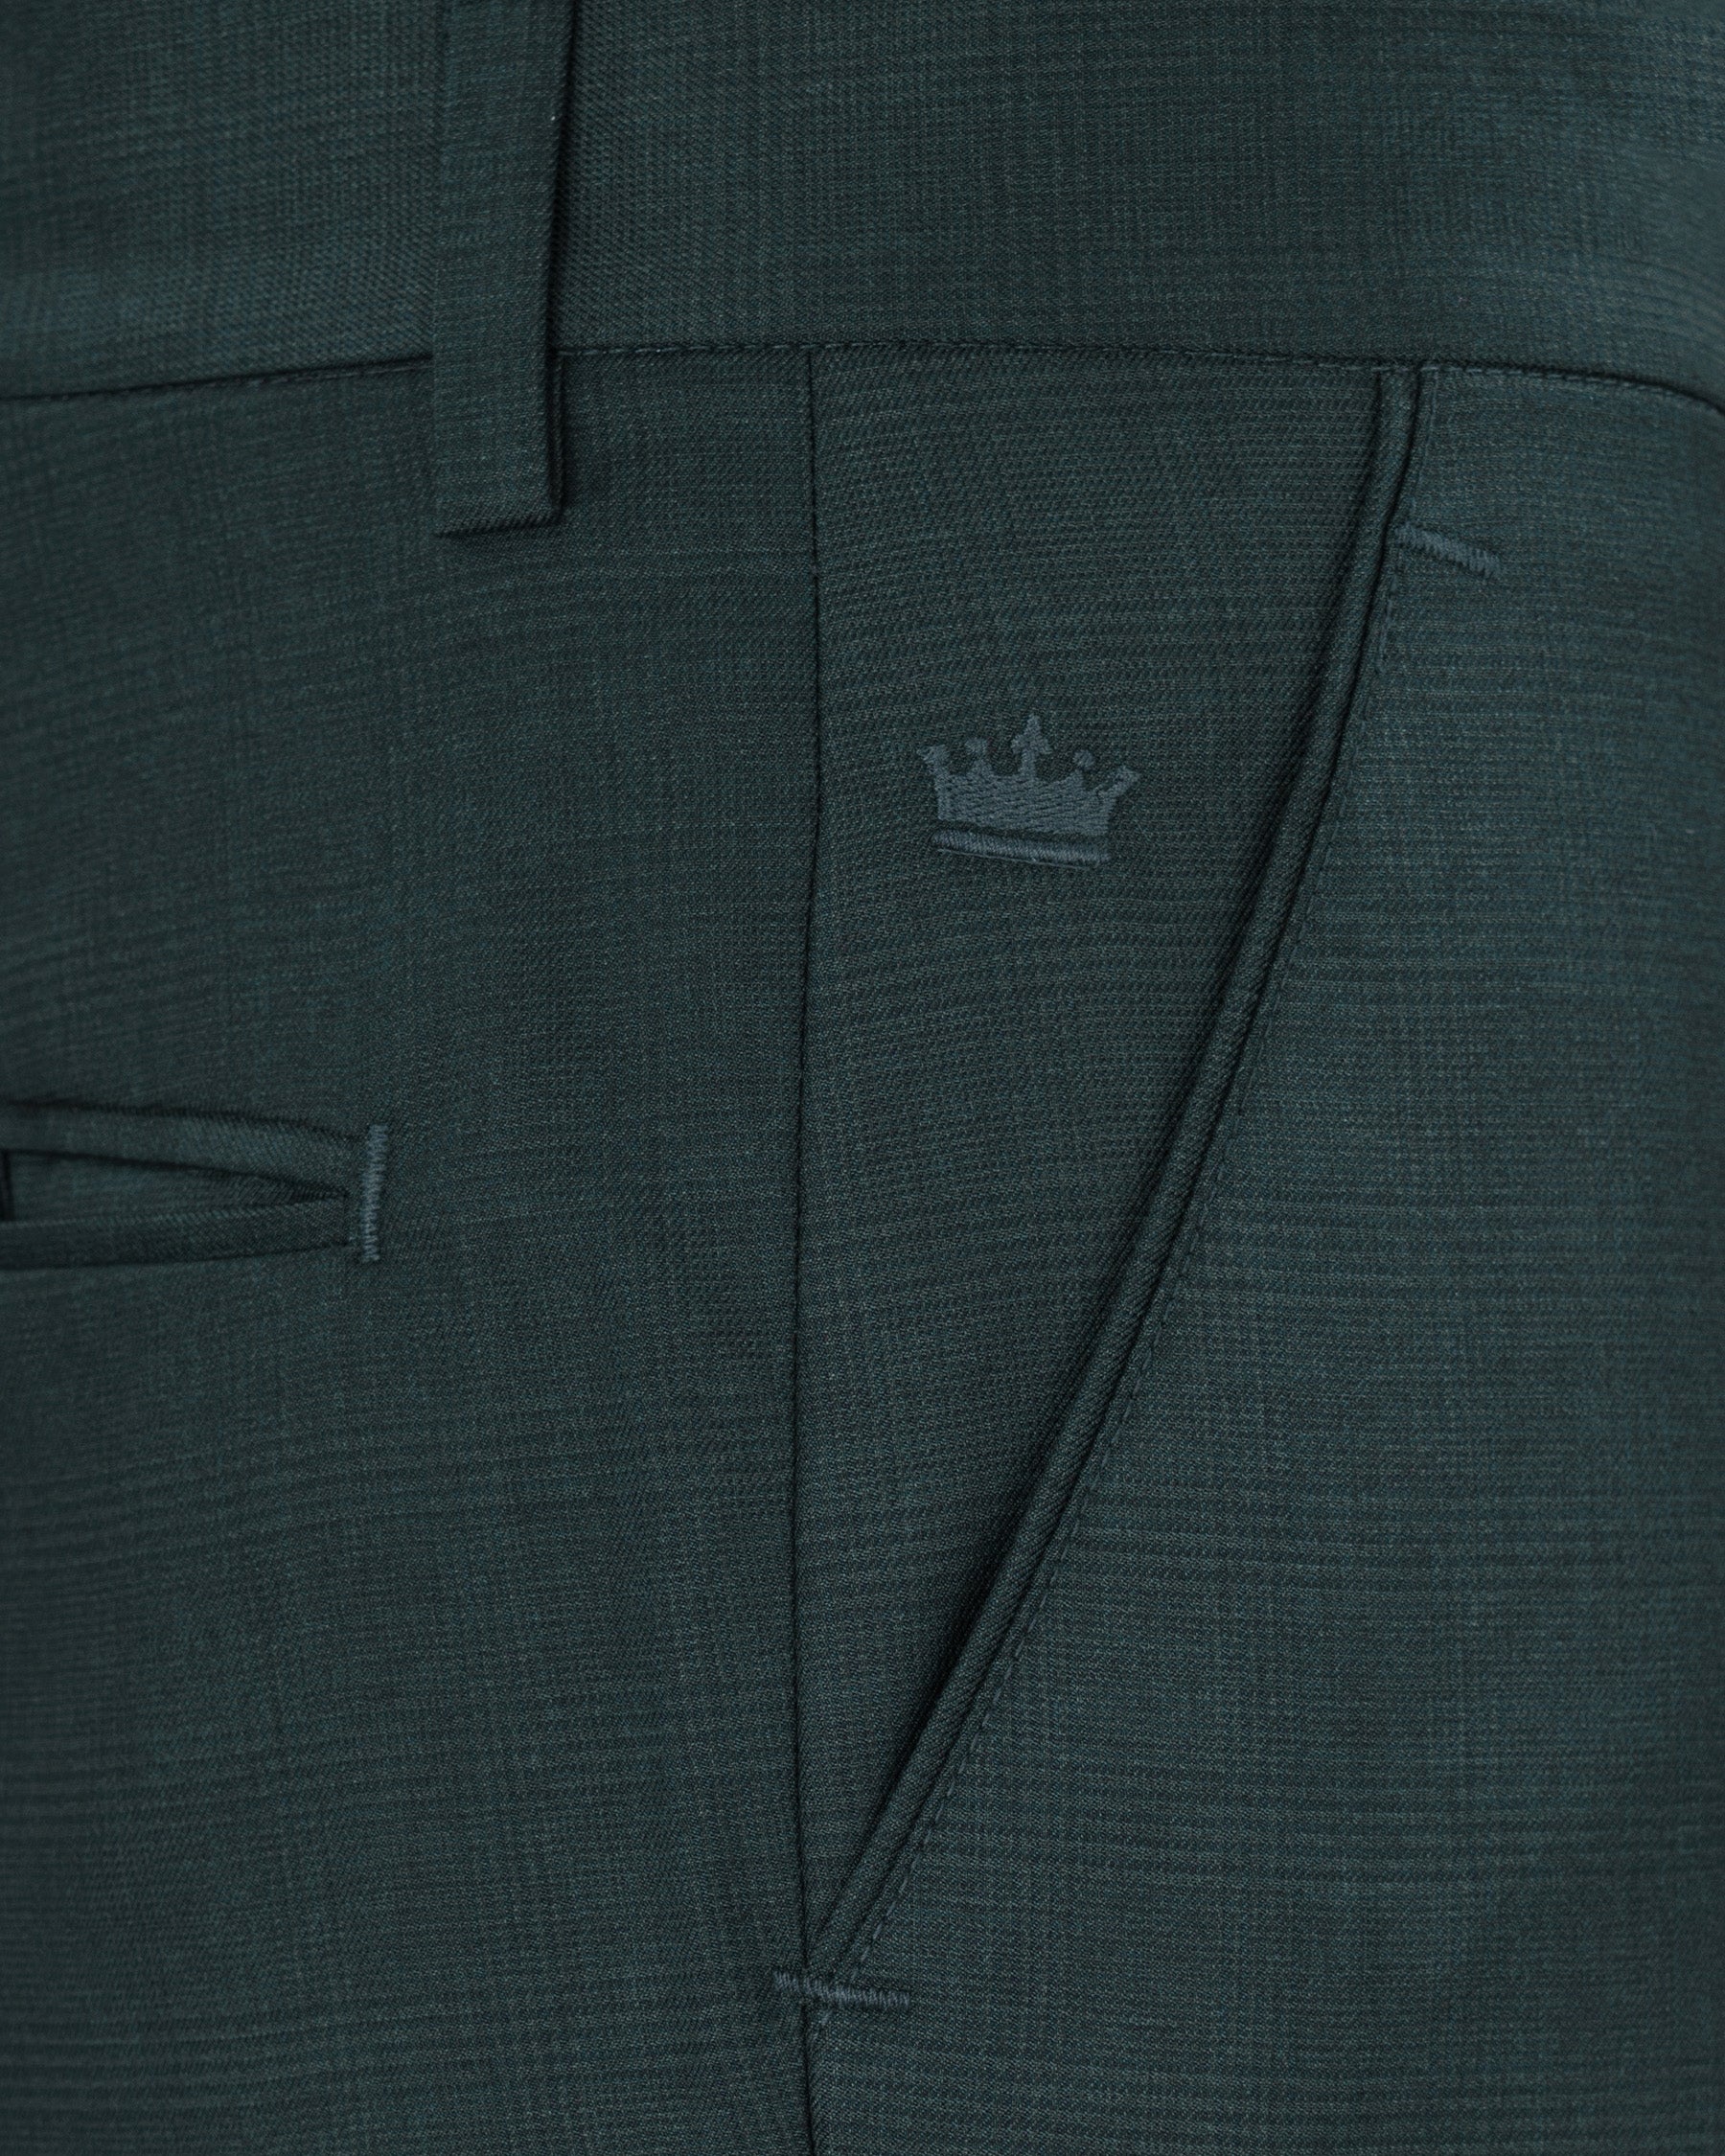 Cape Cod Green Subtle Plaid Double Breasted Suit ST1747-DB-36, ST1747-DB-38, ST1747-DB-40, ST1747-DB-42, ST1747-DB-44, ST1747-DB-46, ST1747-DB-48, ST1747-DB-50, ST1747-DB-52, ST1747-DB-54, ST1747-DB-56, ST1747-DB-58, ST1747-DB-60